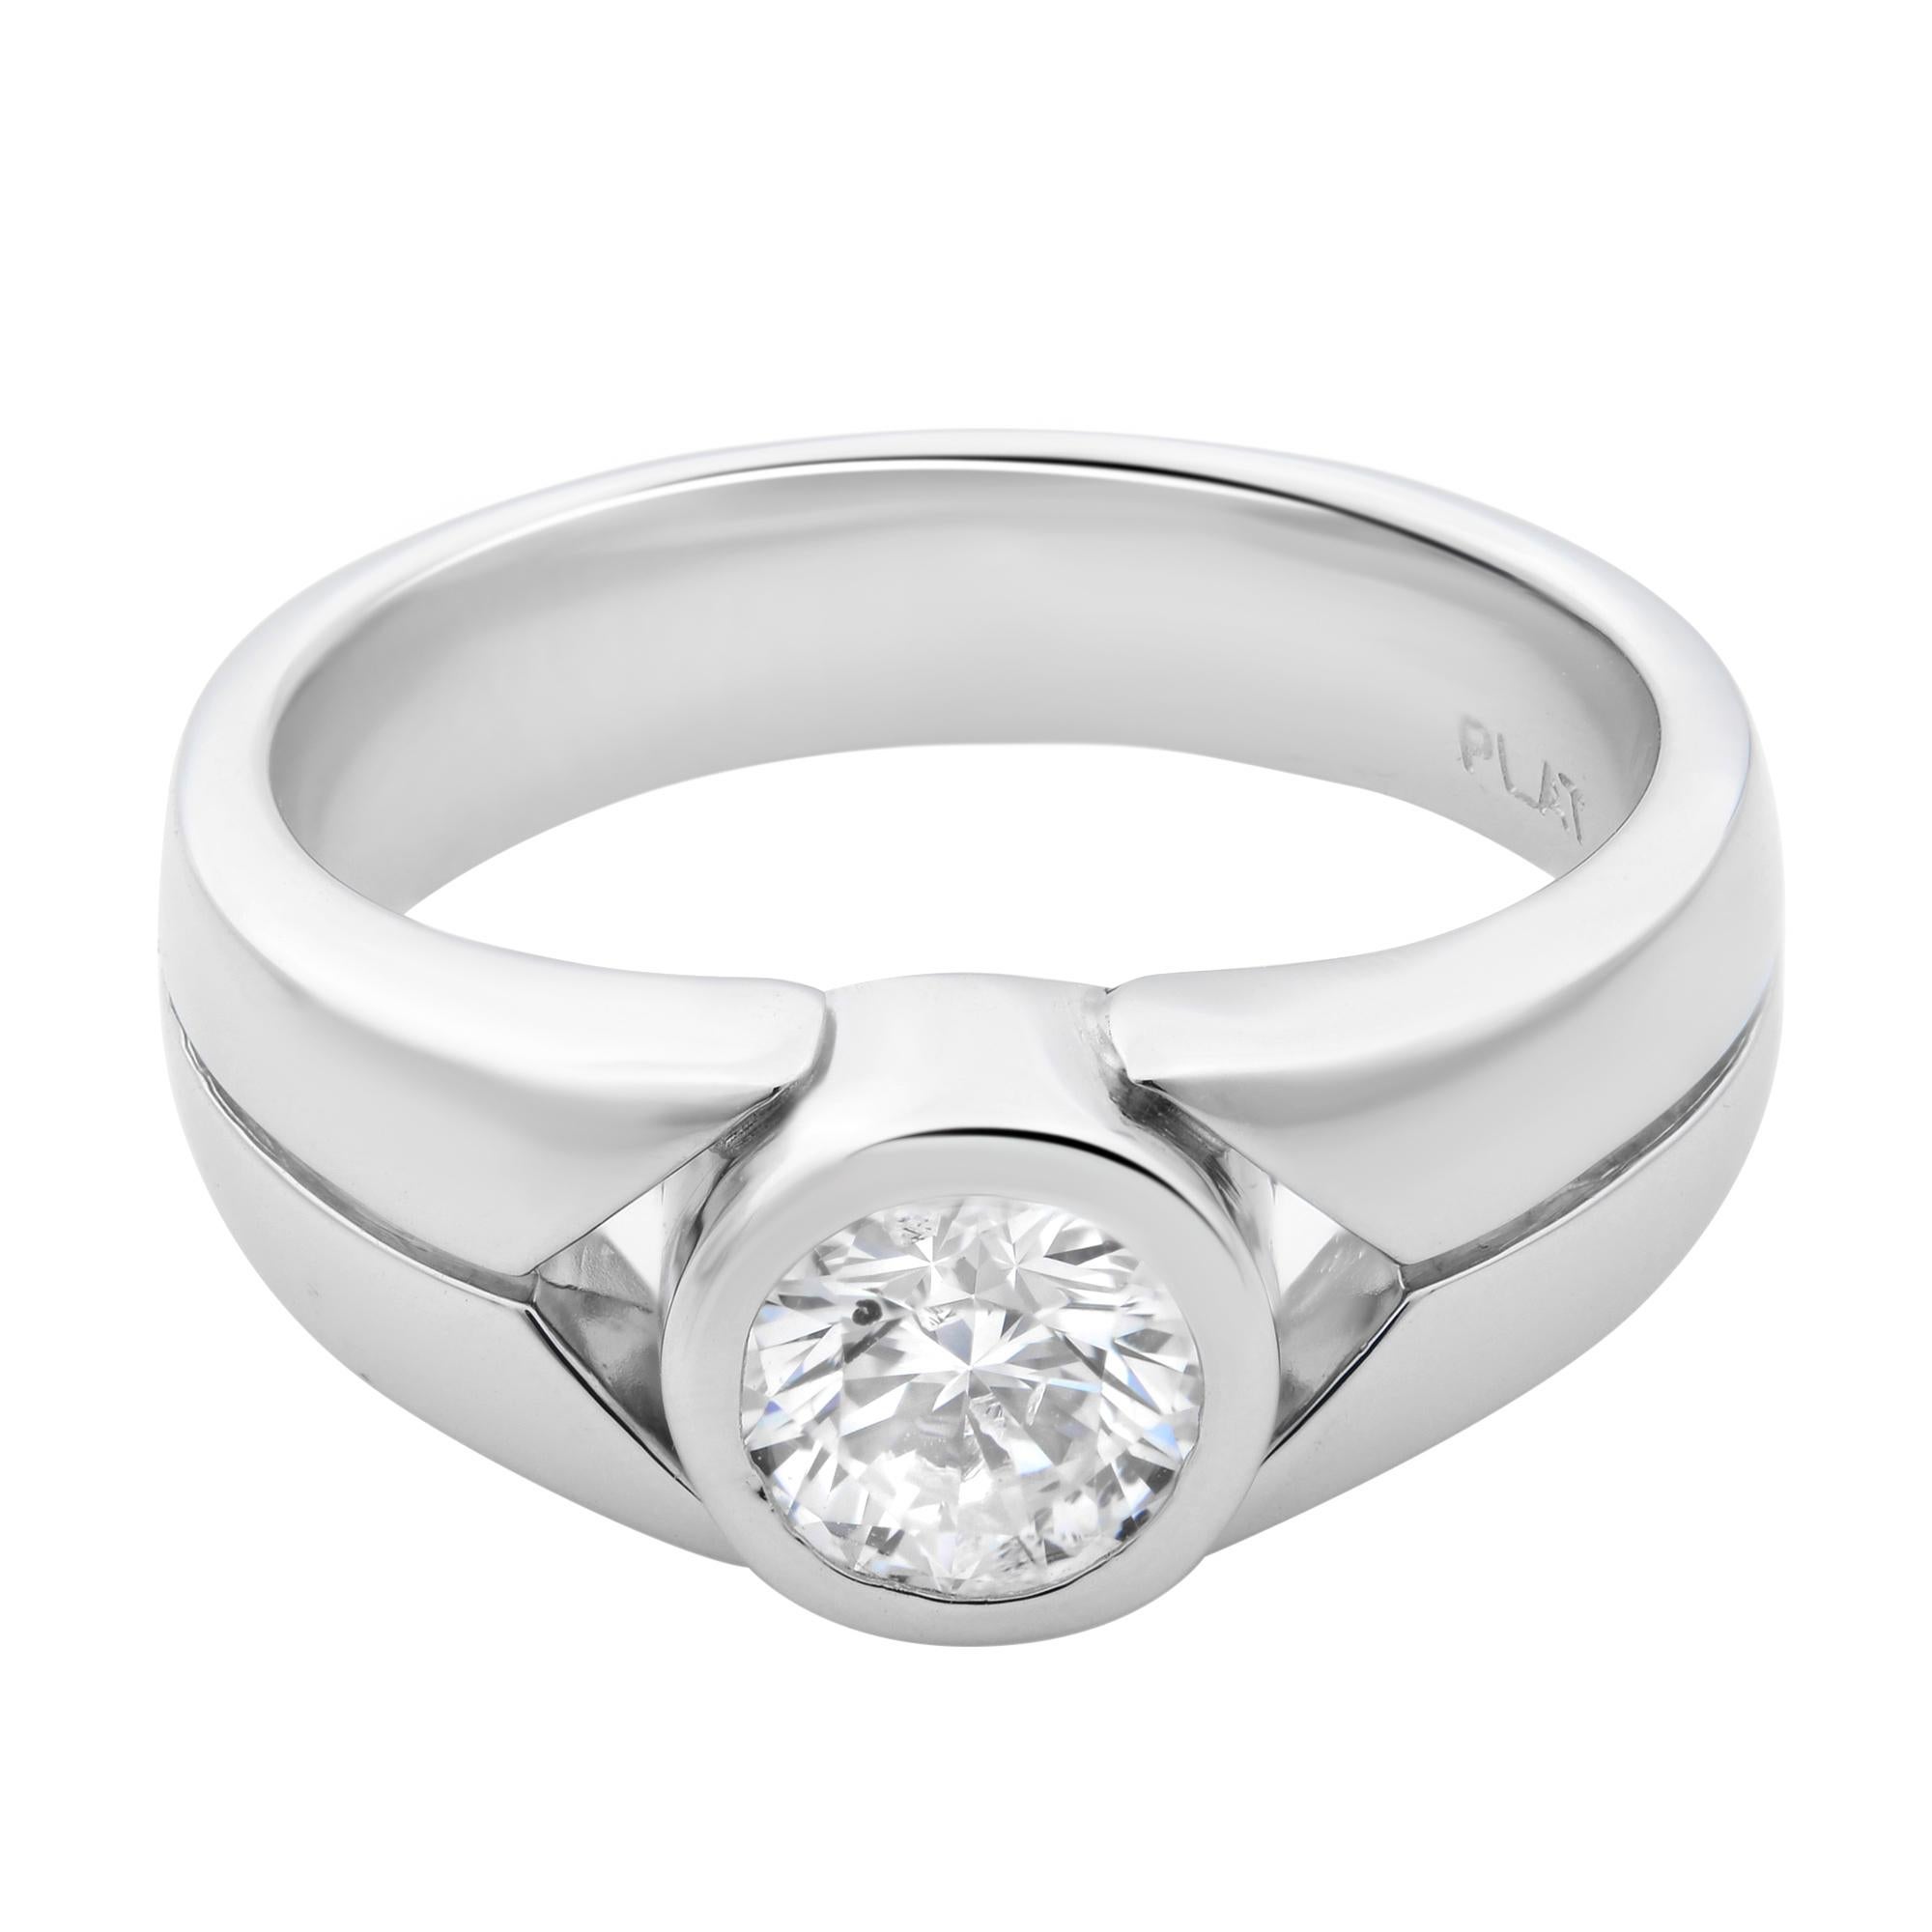 This elegant and classic diamond engagement ring is crafted in highly polished platinum. Features a bezel set round brilliant cut diamond with a total carat weight of 0.75. Diamond color H and SI1 clarity. Band width: 5.2 mm. Ring size: 5.75. Total